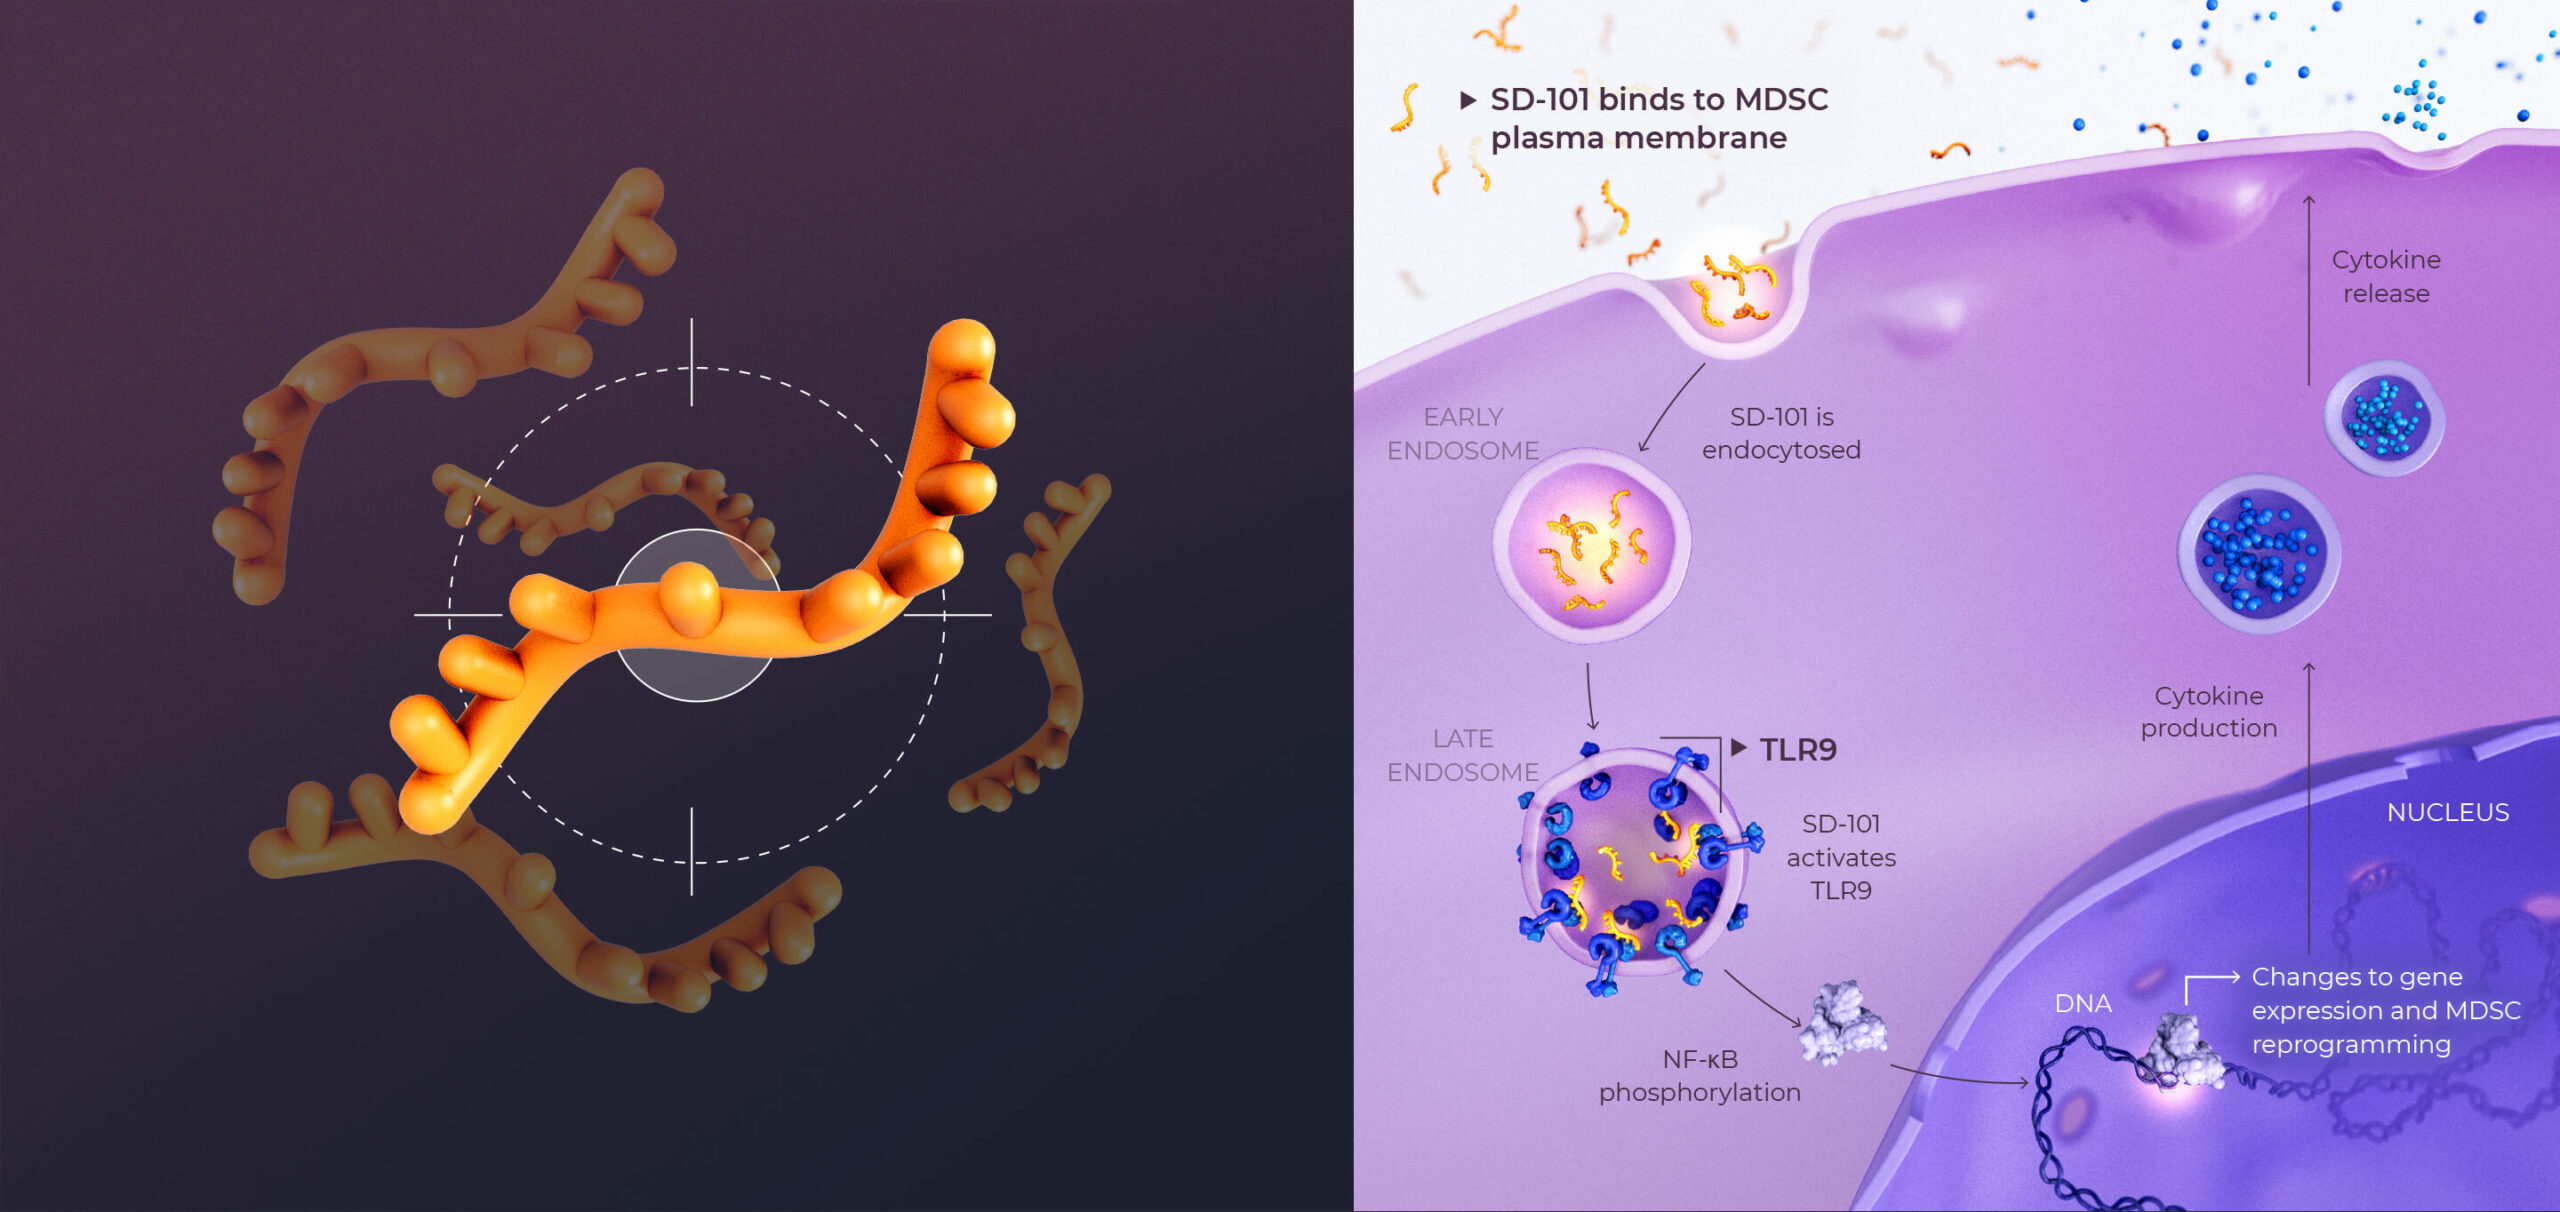 Left: Scientific illustration of TriSalus’ investigational candidate SD-101, a single stranded oligonucleotide-based therapy Right: Scientific illustration of SD-101 Mechanism: SD-101 binds to a plasma membrane and is endocytosed. In a late endosome, SD-101 binds to and activates TLR9 which initiates a cascade of events through NF-κB phosphorylation. Gene expression changes reprogram MDSCs to produce and release cytokines.